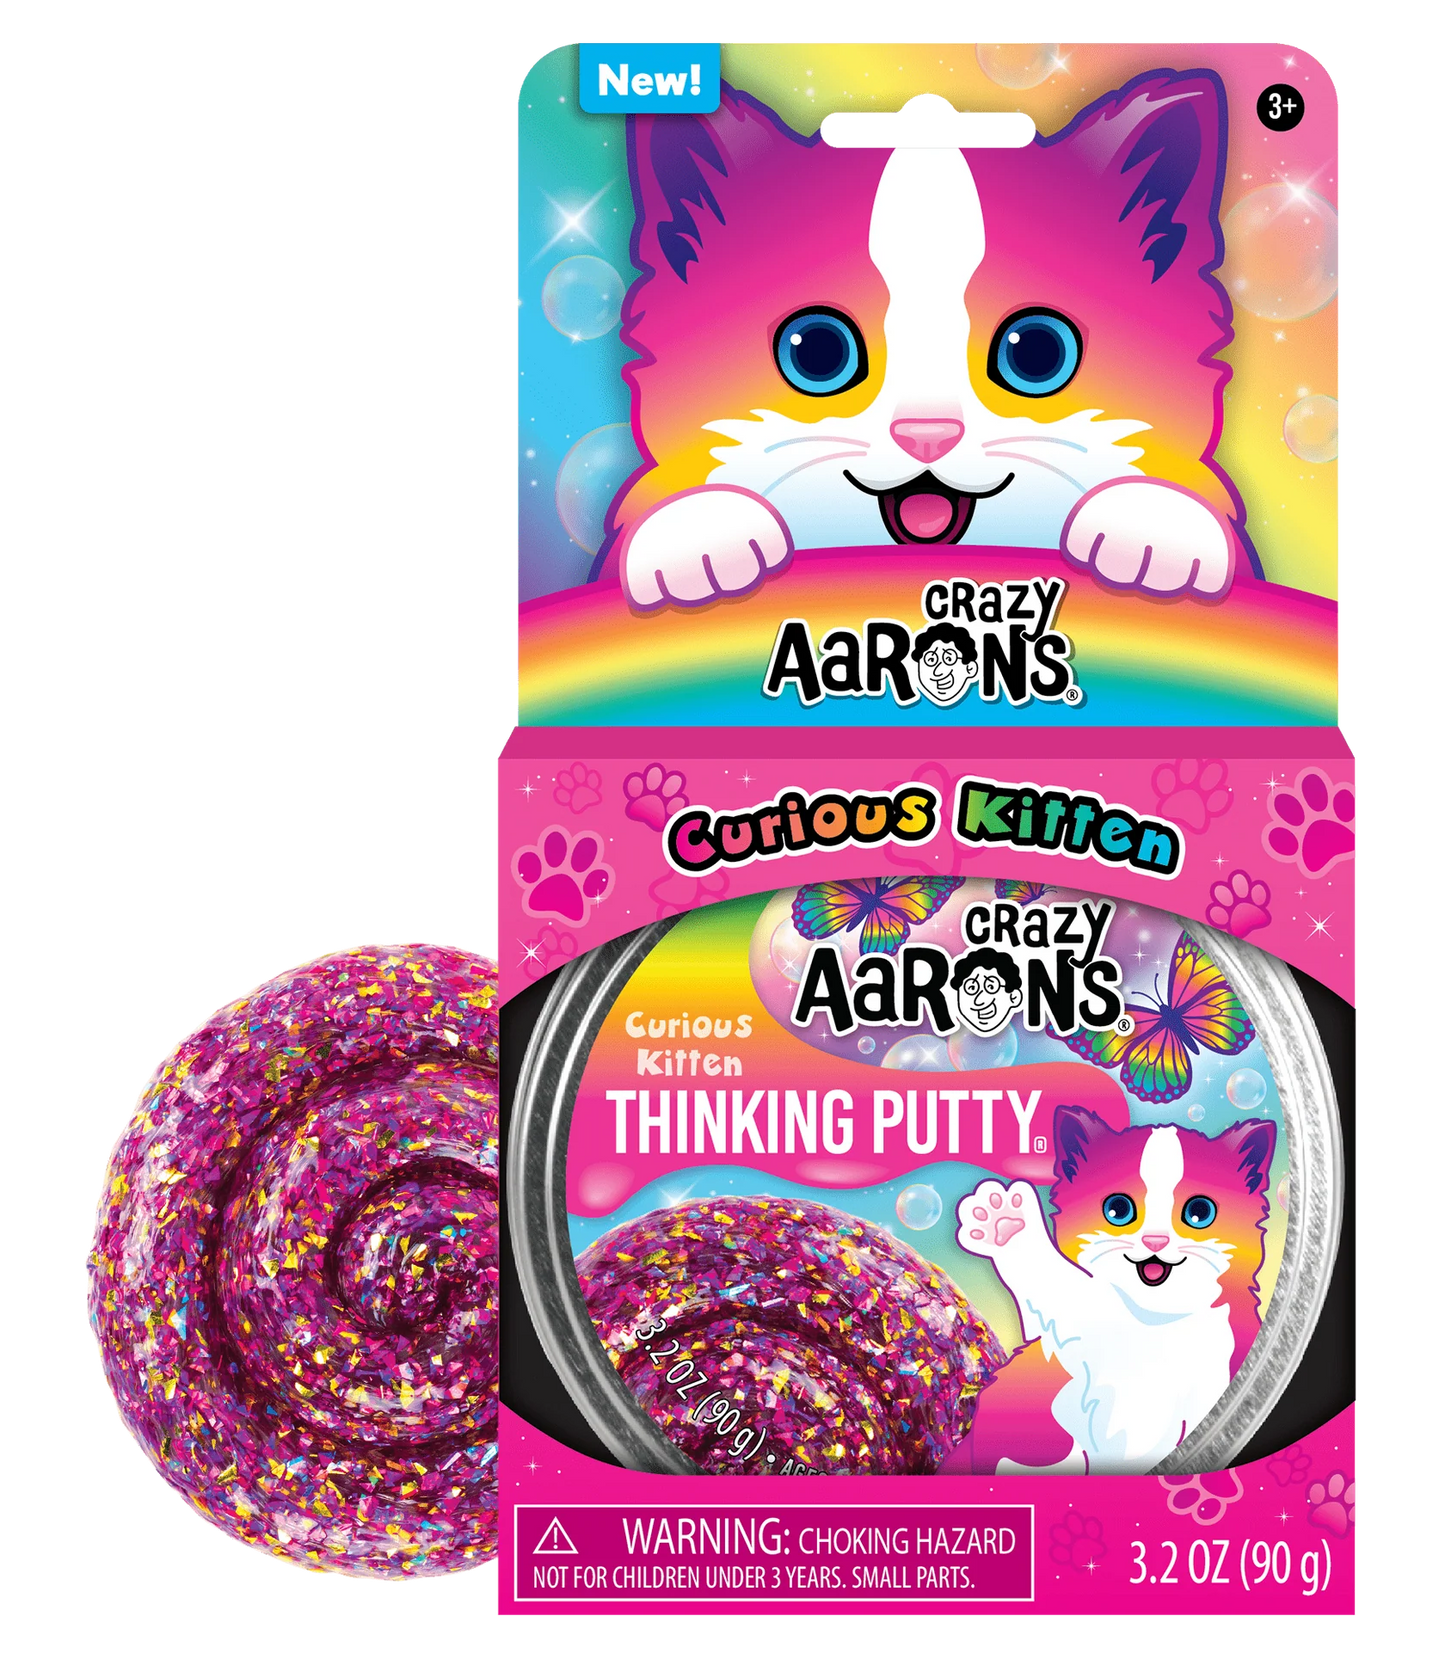 CRAZY AARON'S THINKING PUTTY CURIOUS KITTEN